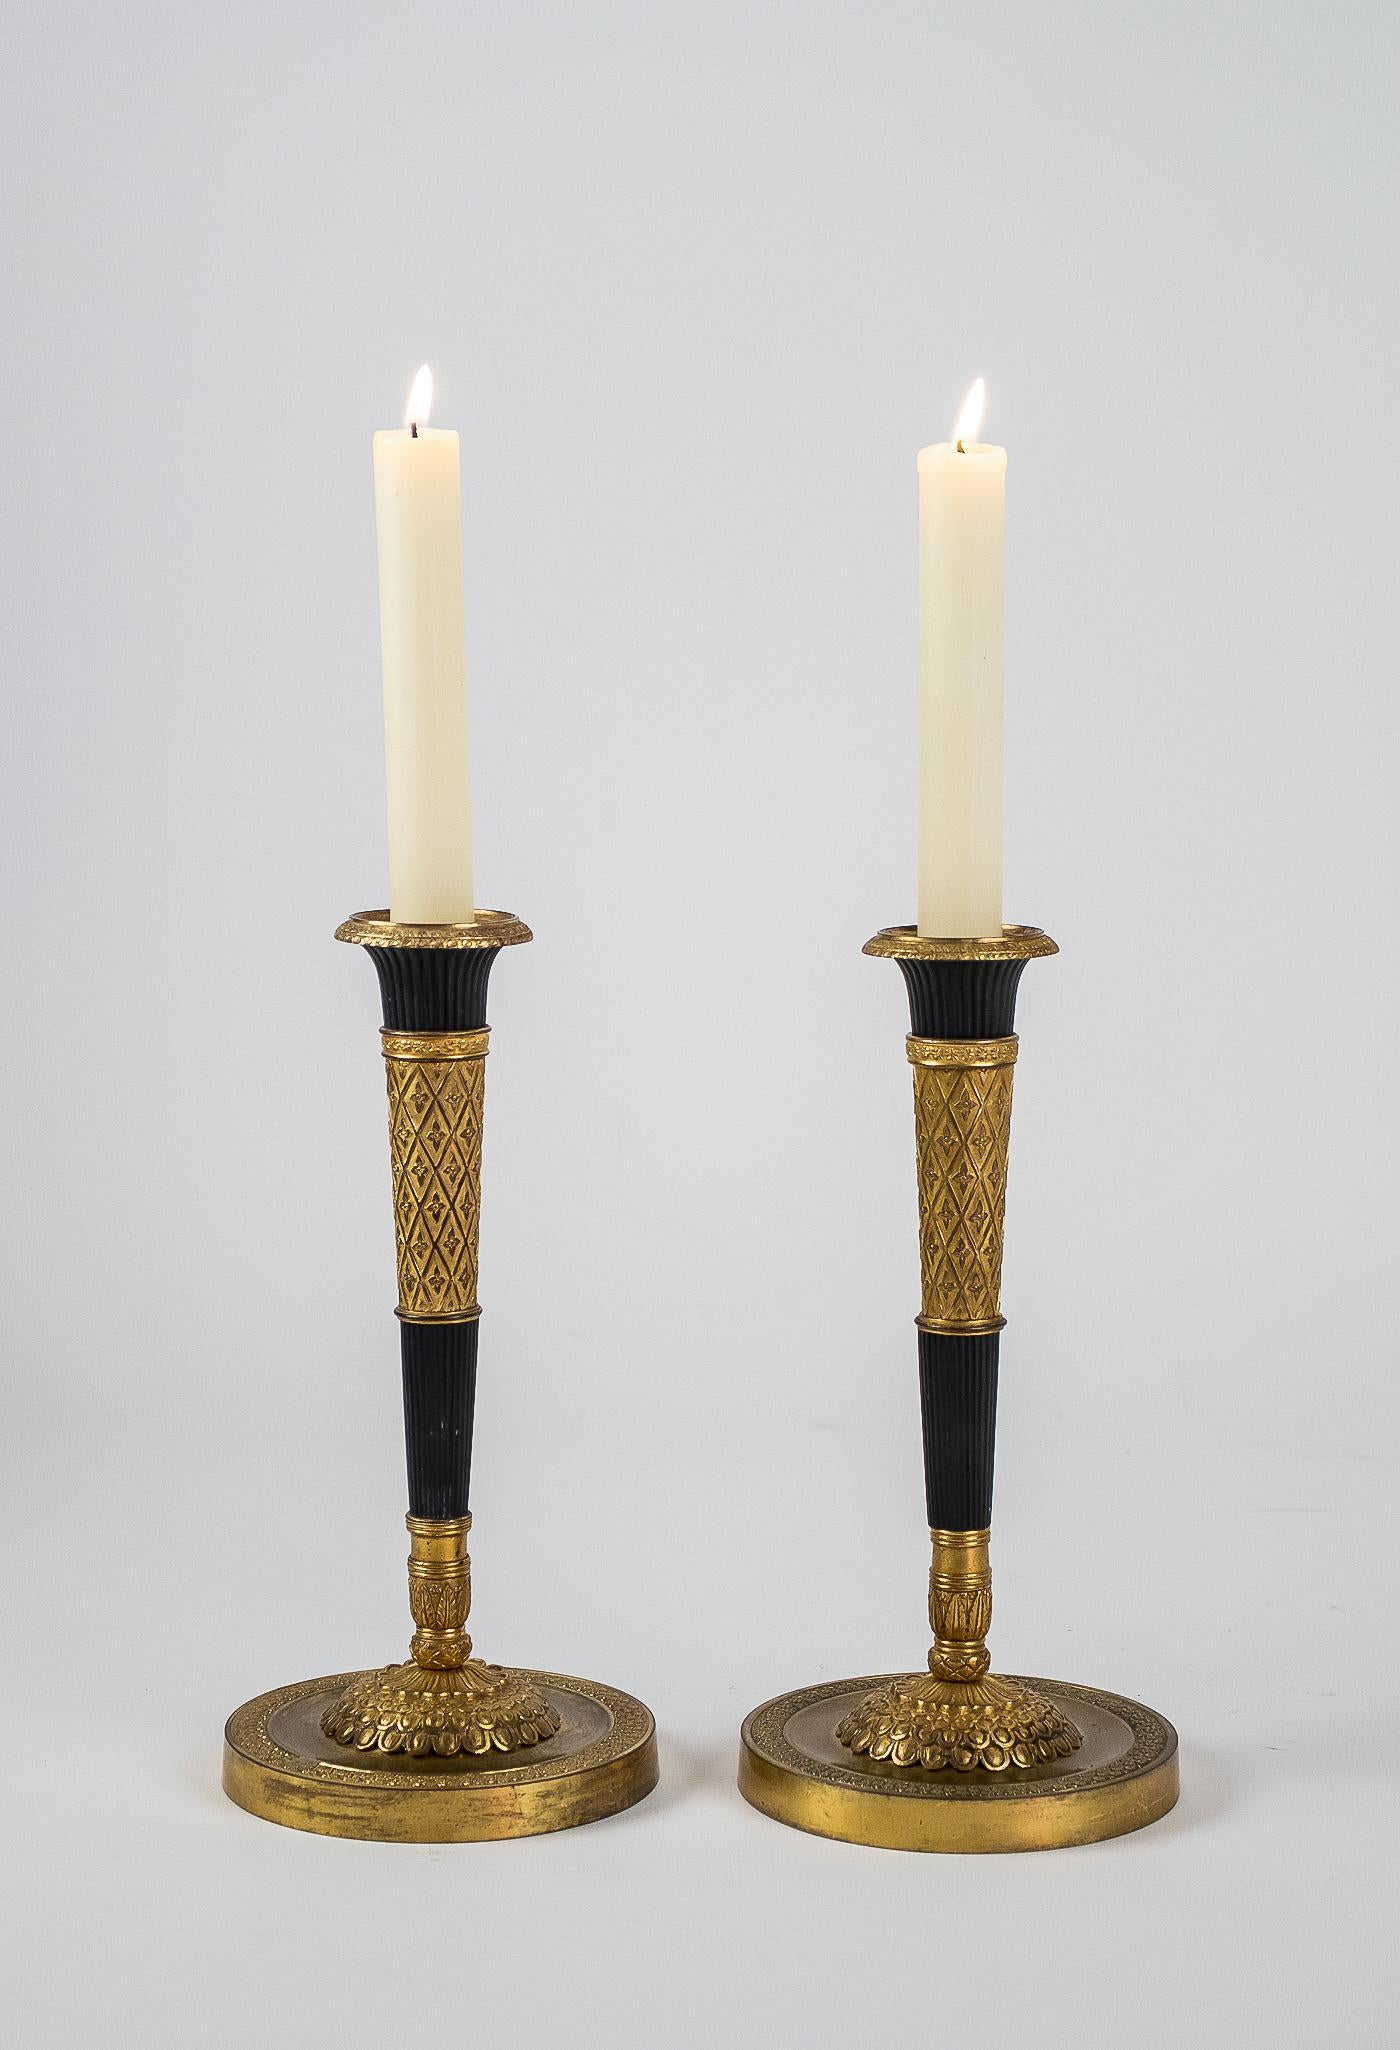 French Directoire Period Pair of French Candlesticks, circa 1798 For Sale 4